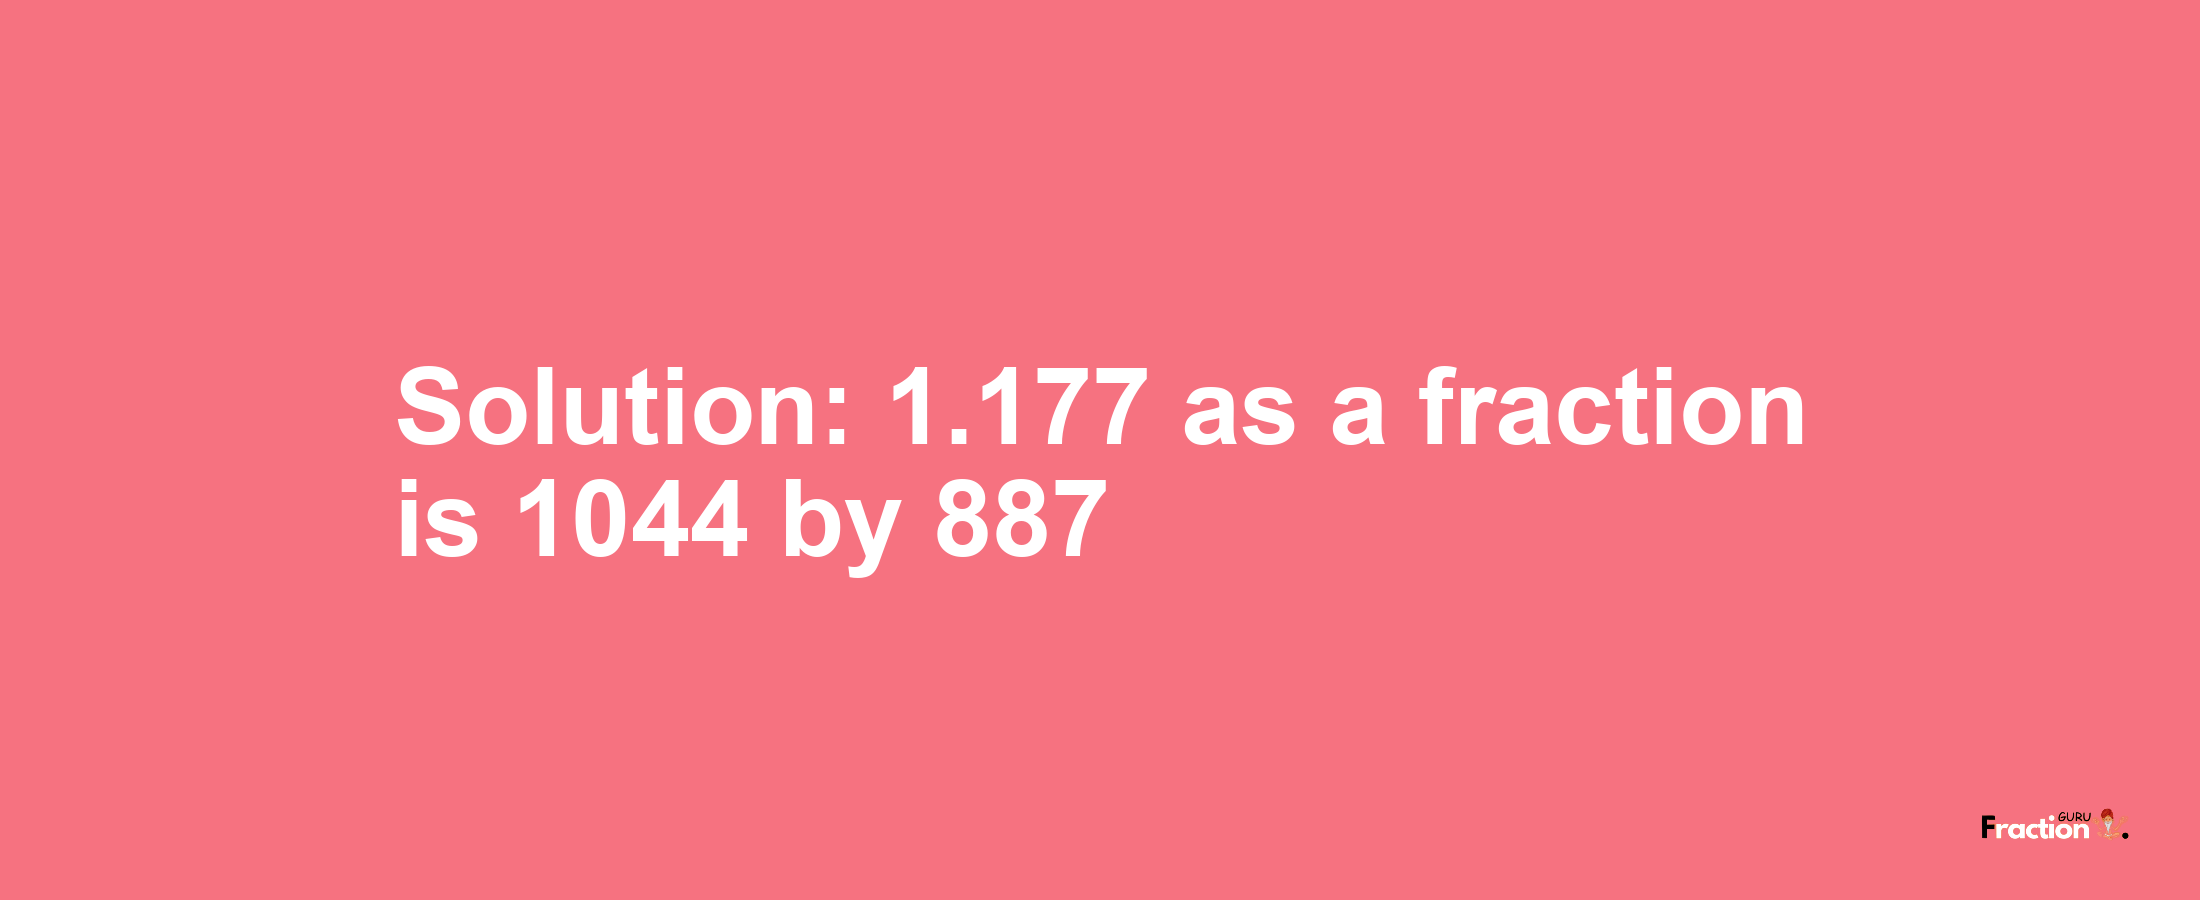 Solution:1.177 as a fraction is 1044/887